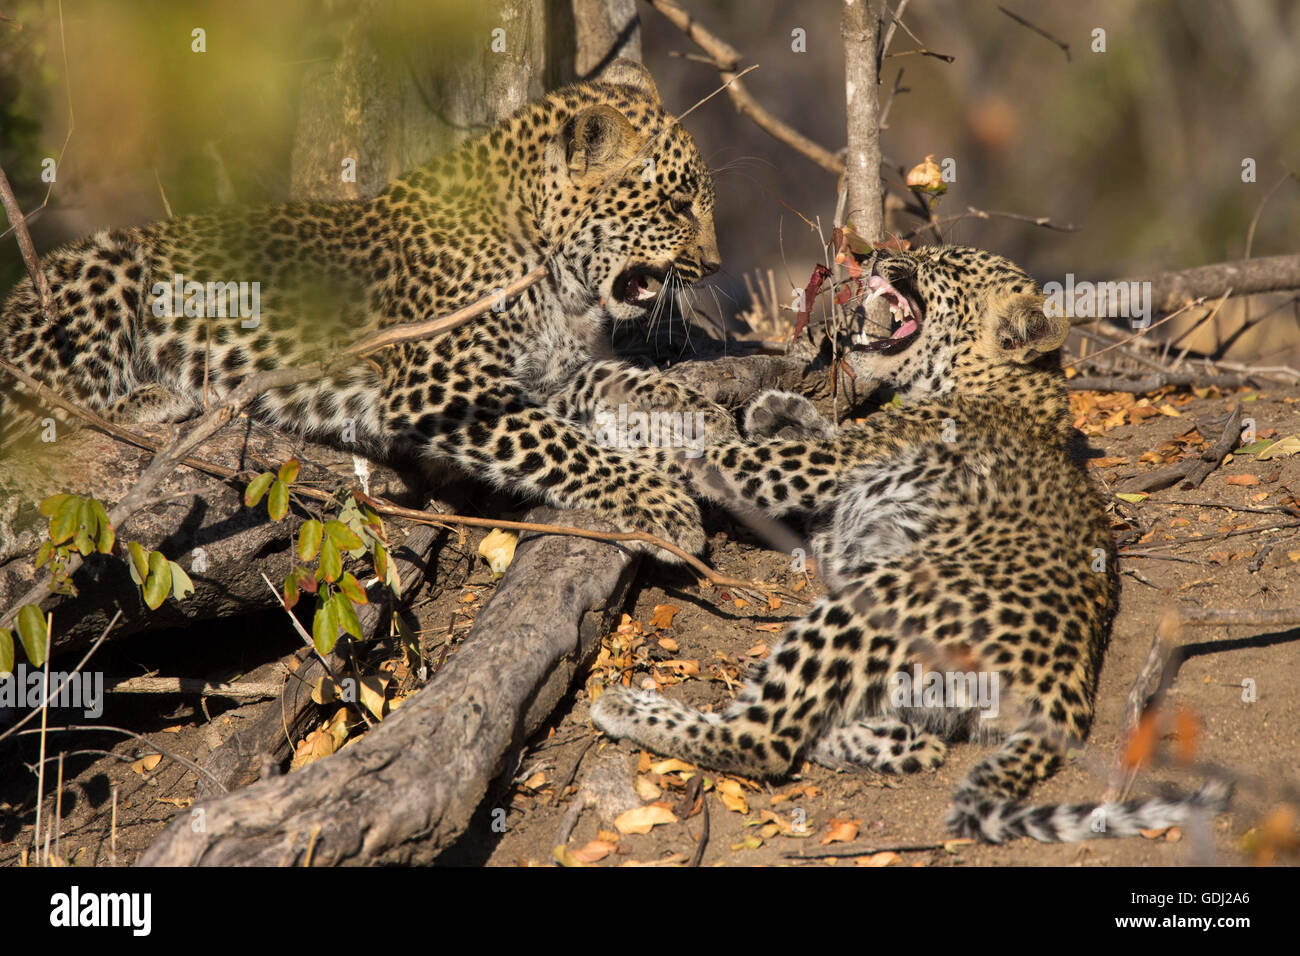 Two leopard cubs (Panthera pardus) play-fighting with the one snarling at it's sibling brother Stock Photo